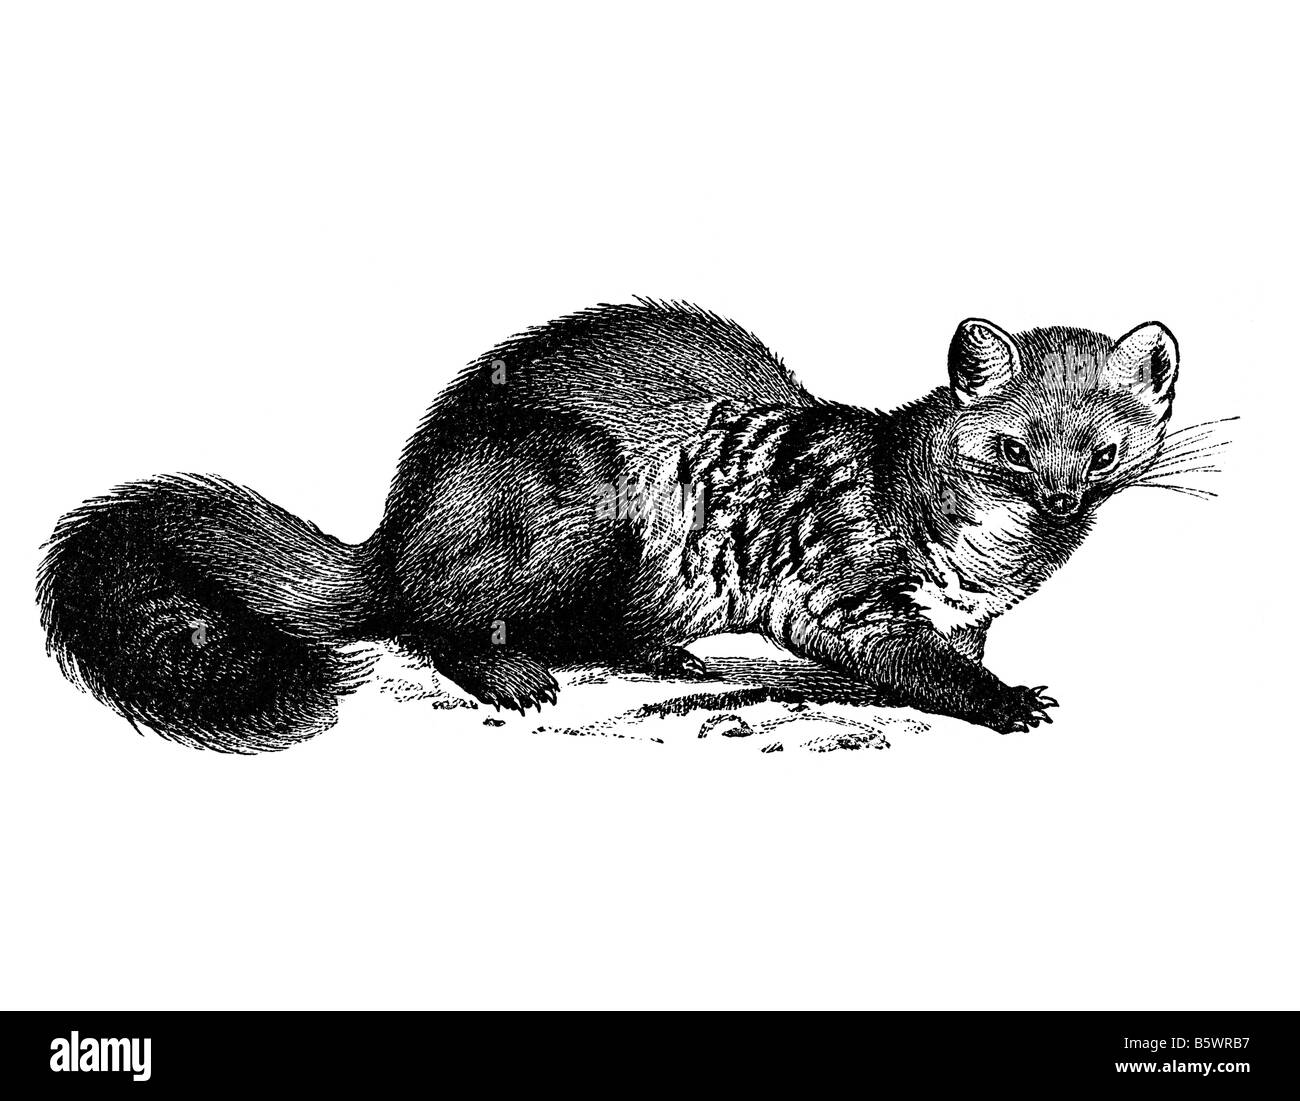 Mustelid, Mustelidae weasel family family of carnivorous mammals Stock Photo